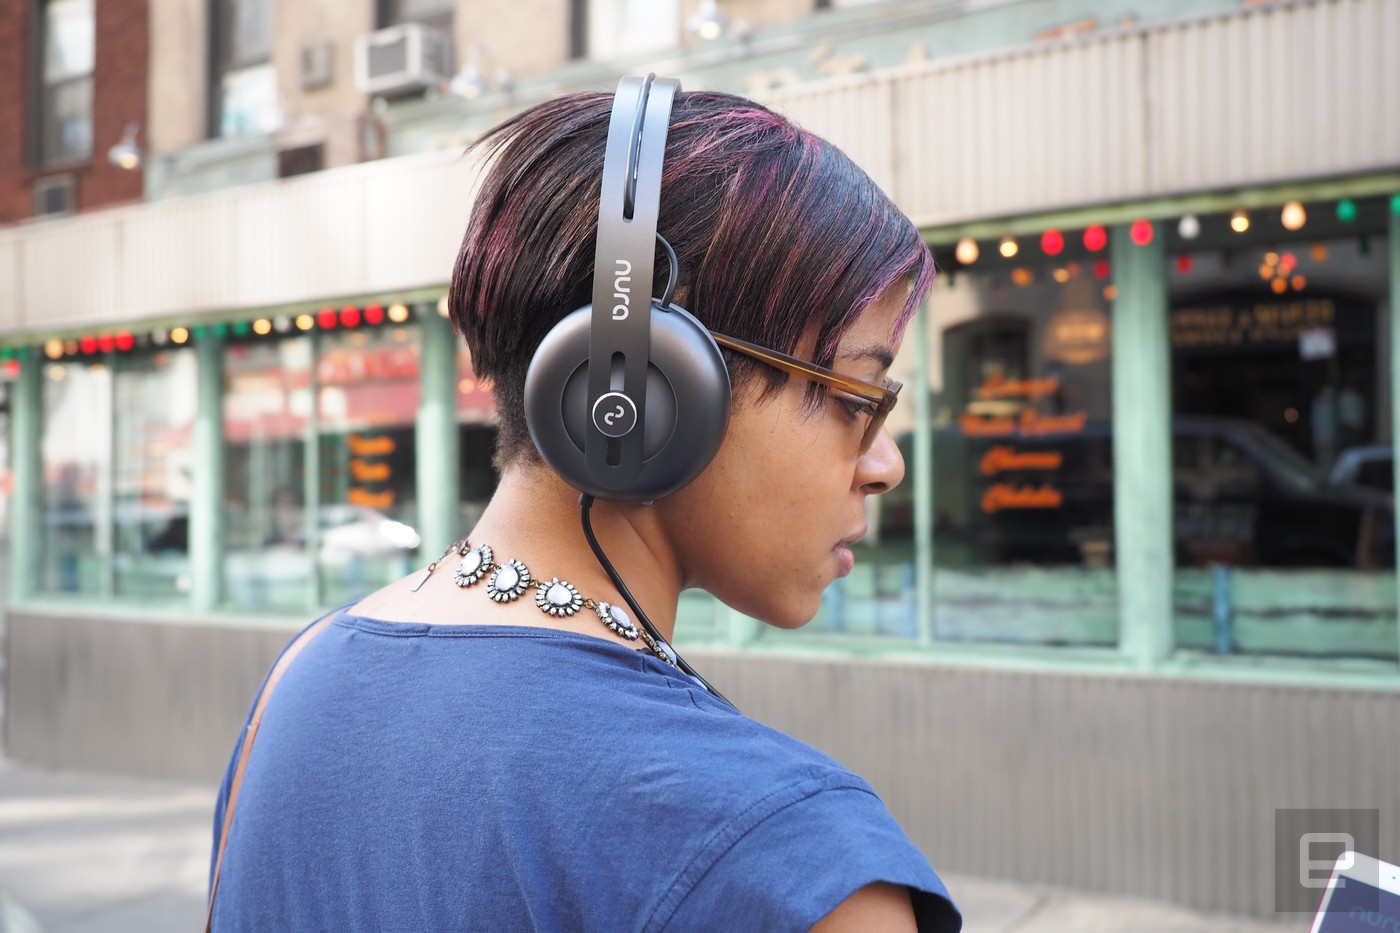 The Nura headphones craft the perfect audio for your ear